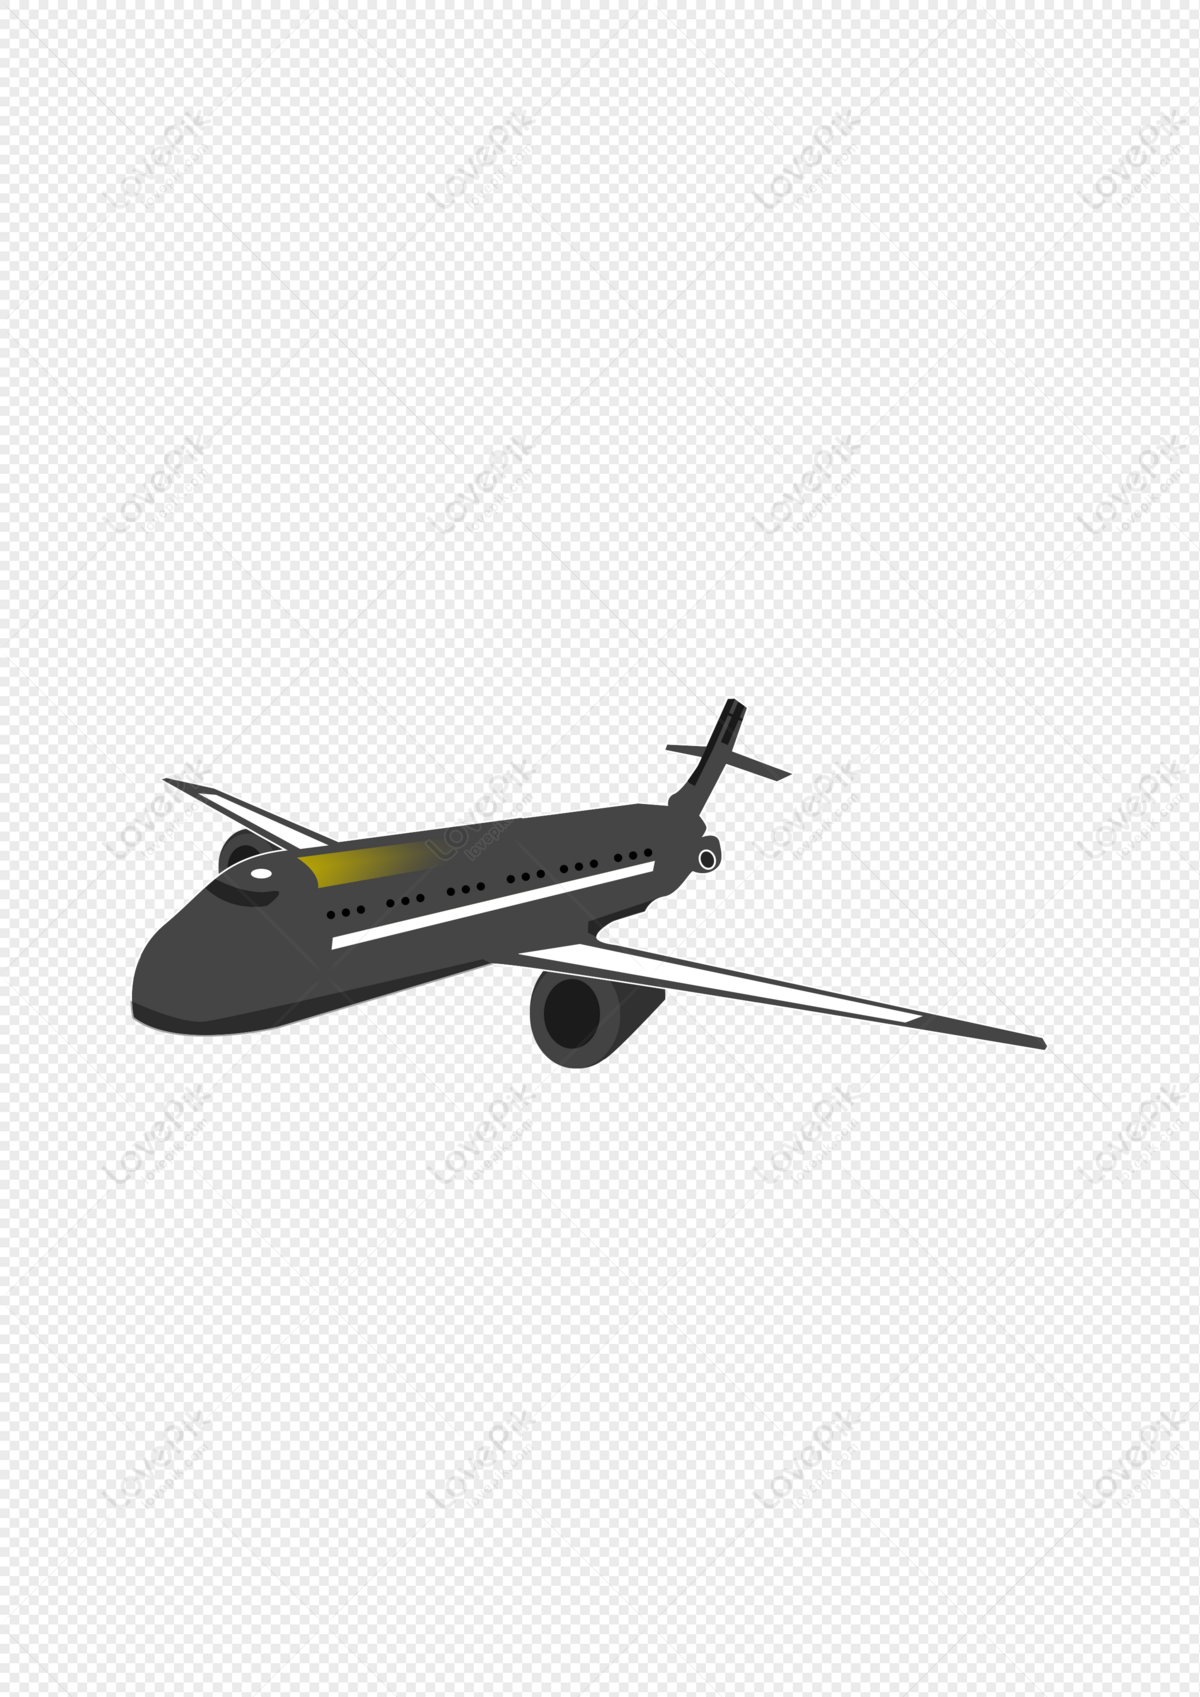 Hand Drawn Cartoon Small Fresh Airplane Flying Black PNG Transparent Image  And Clipart Image For Free Download - Lovepik | 401556937